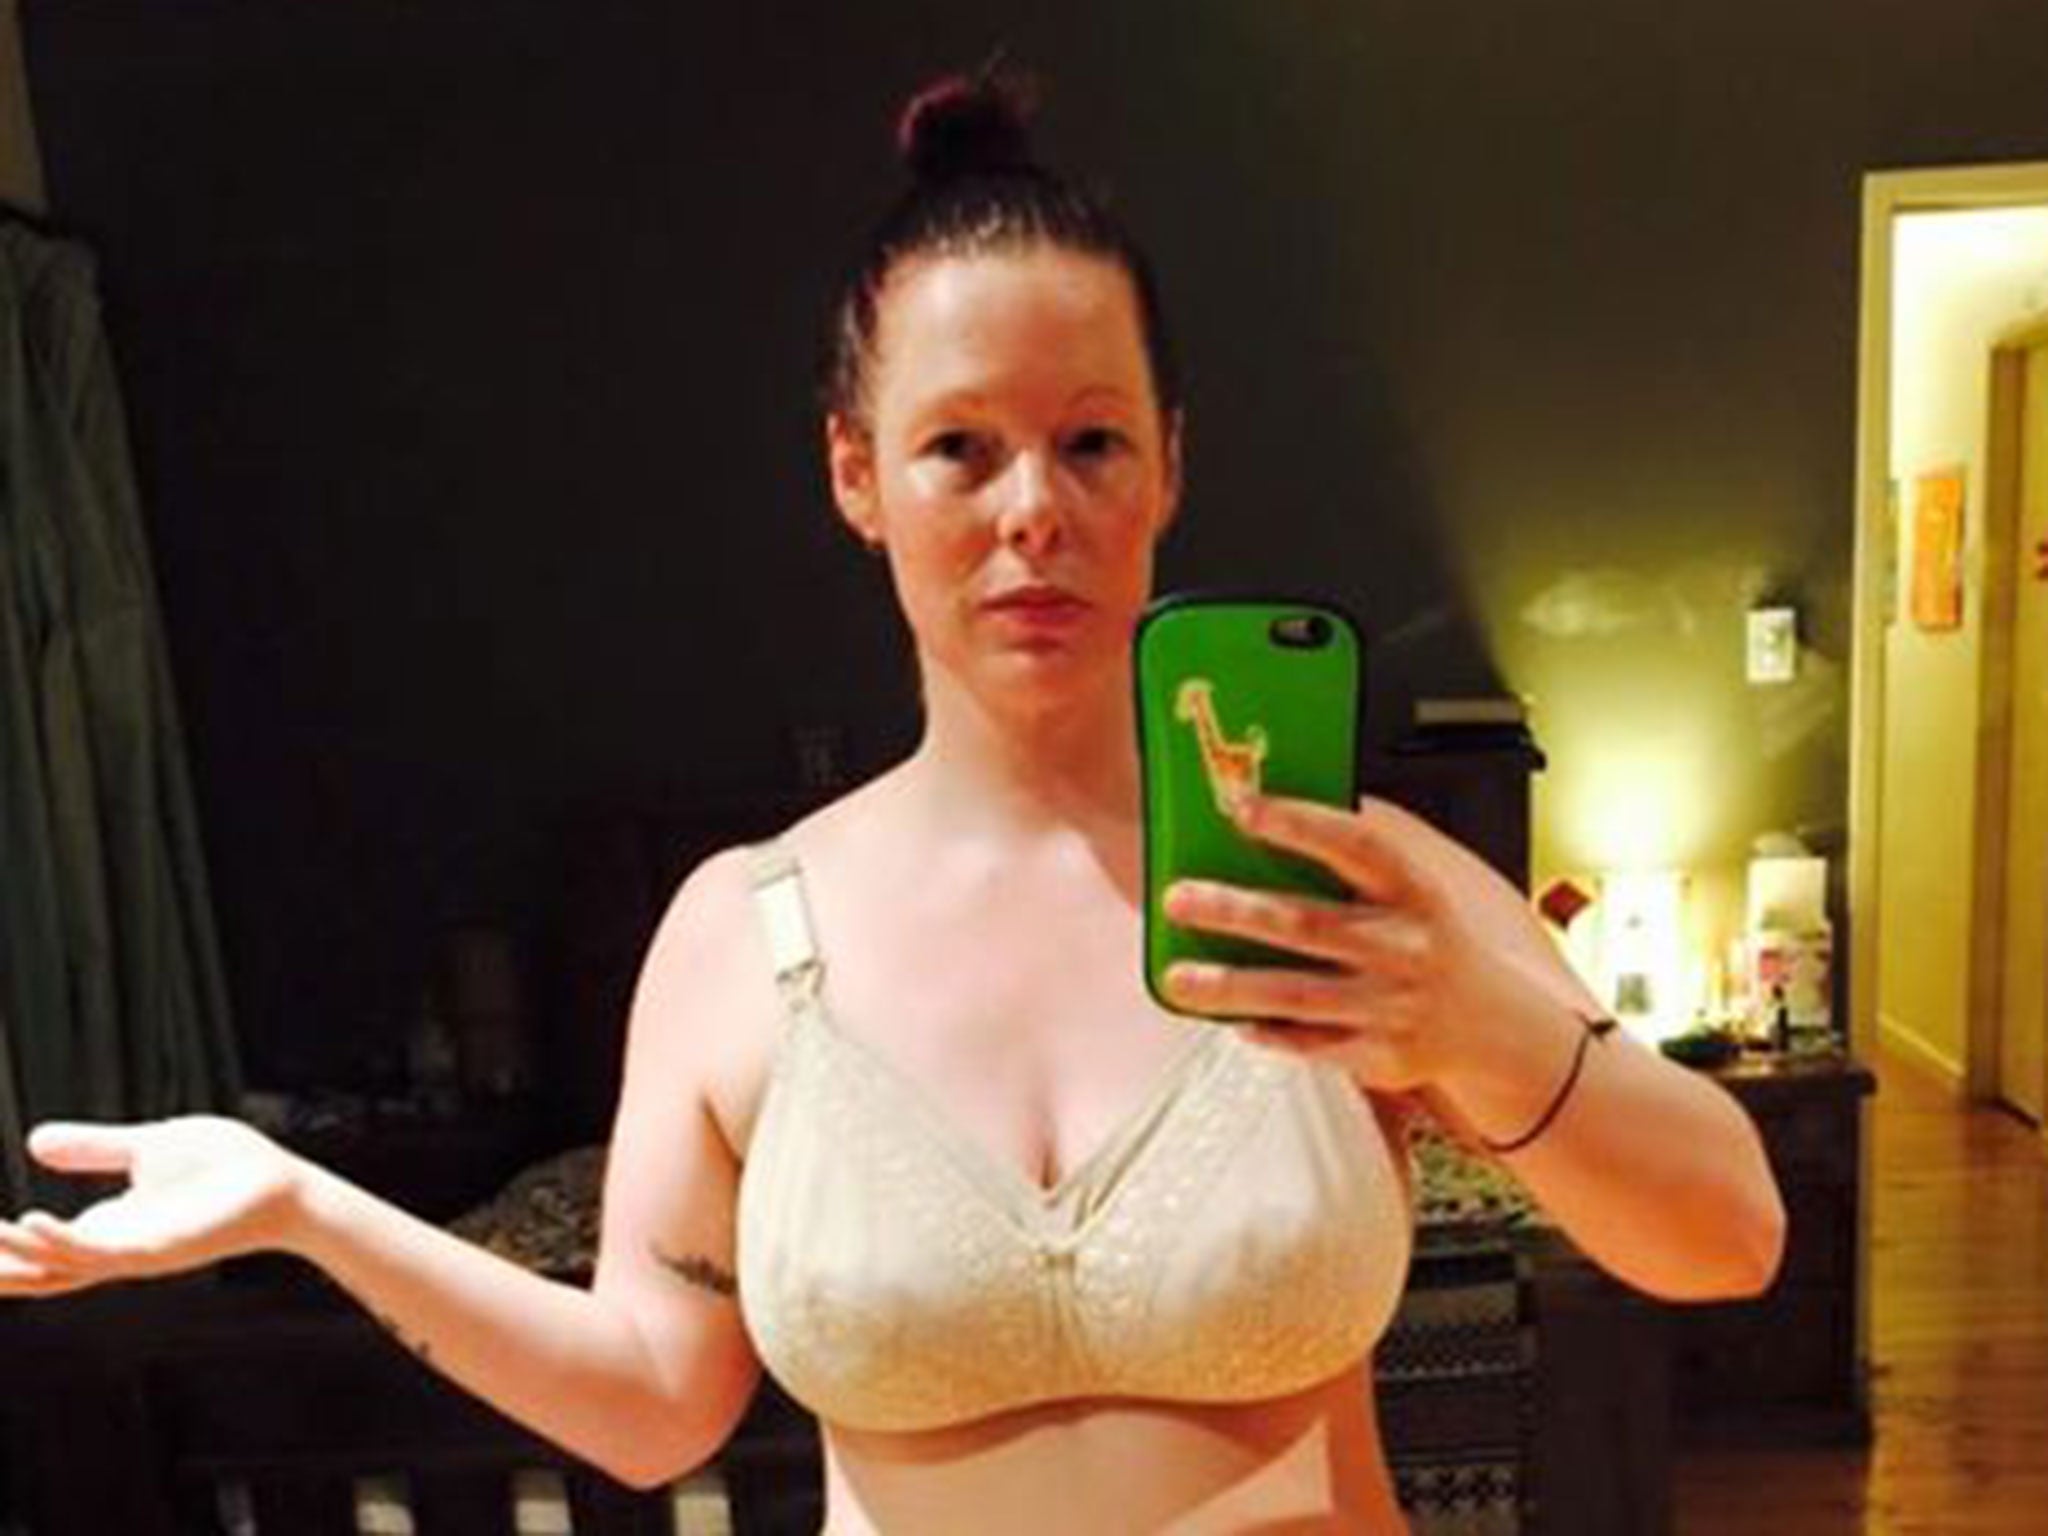 Badassundies New Mother Poses In Underwear In Facebook Photo To Silence Body Shamers The